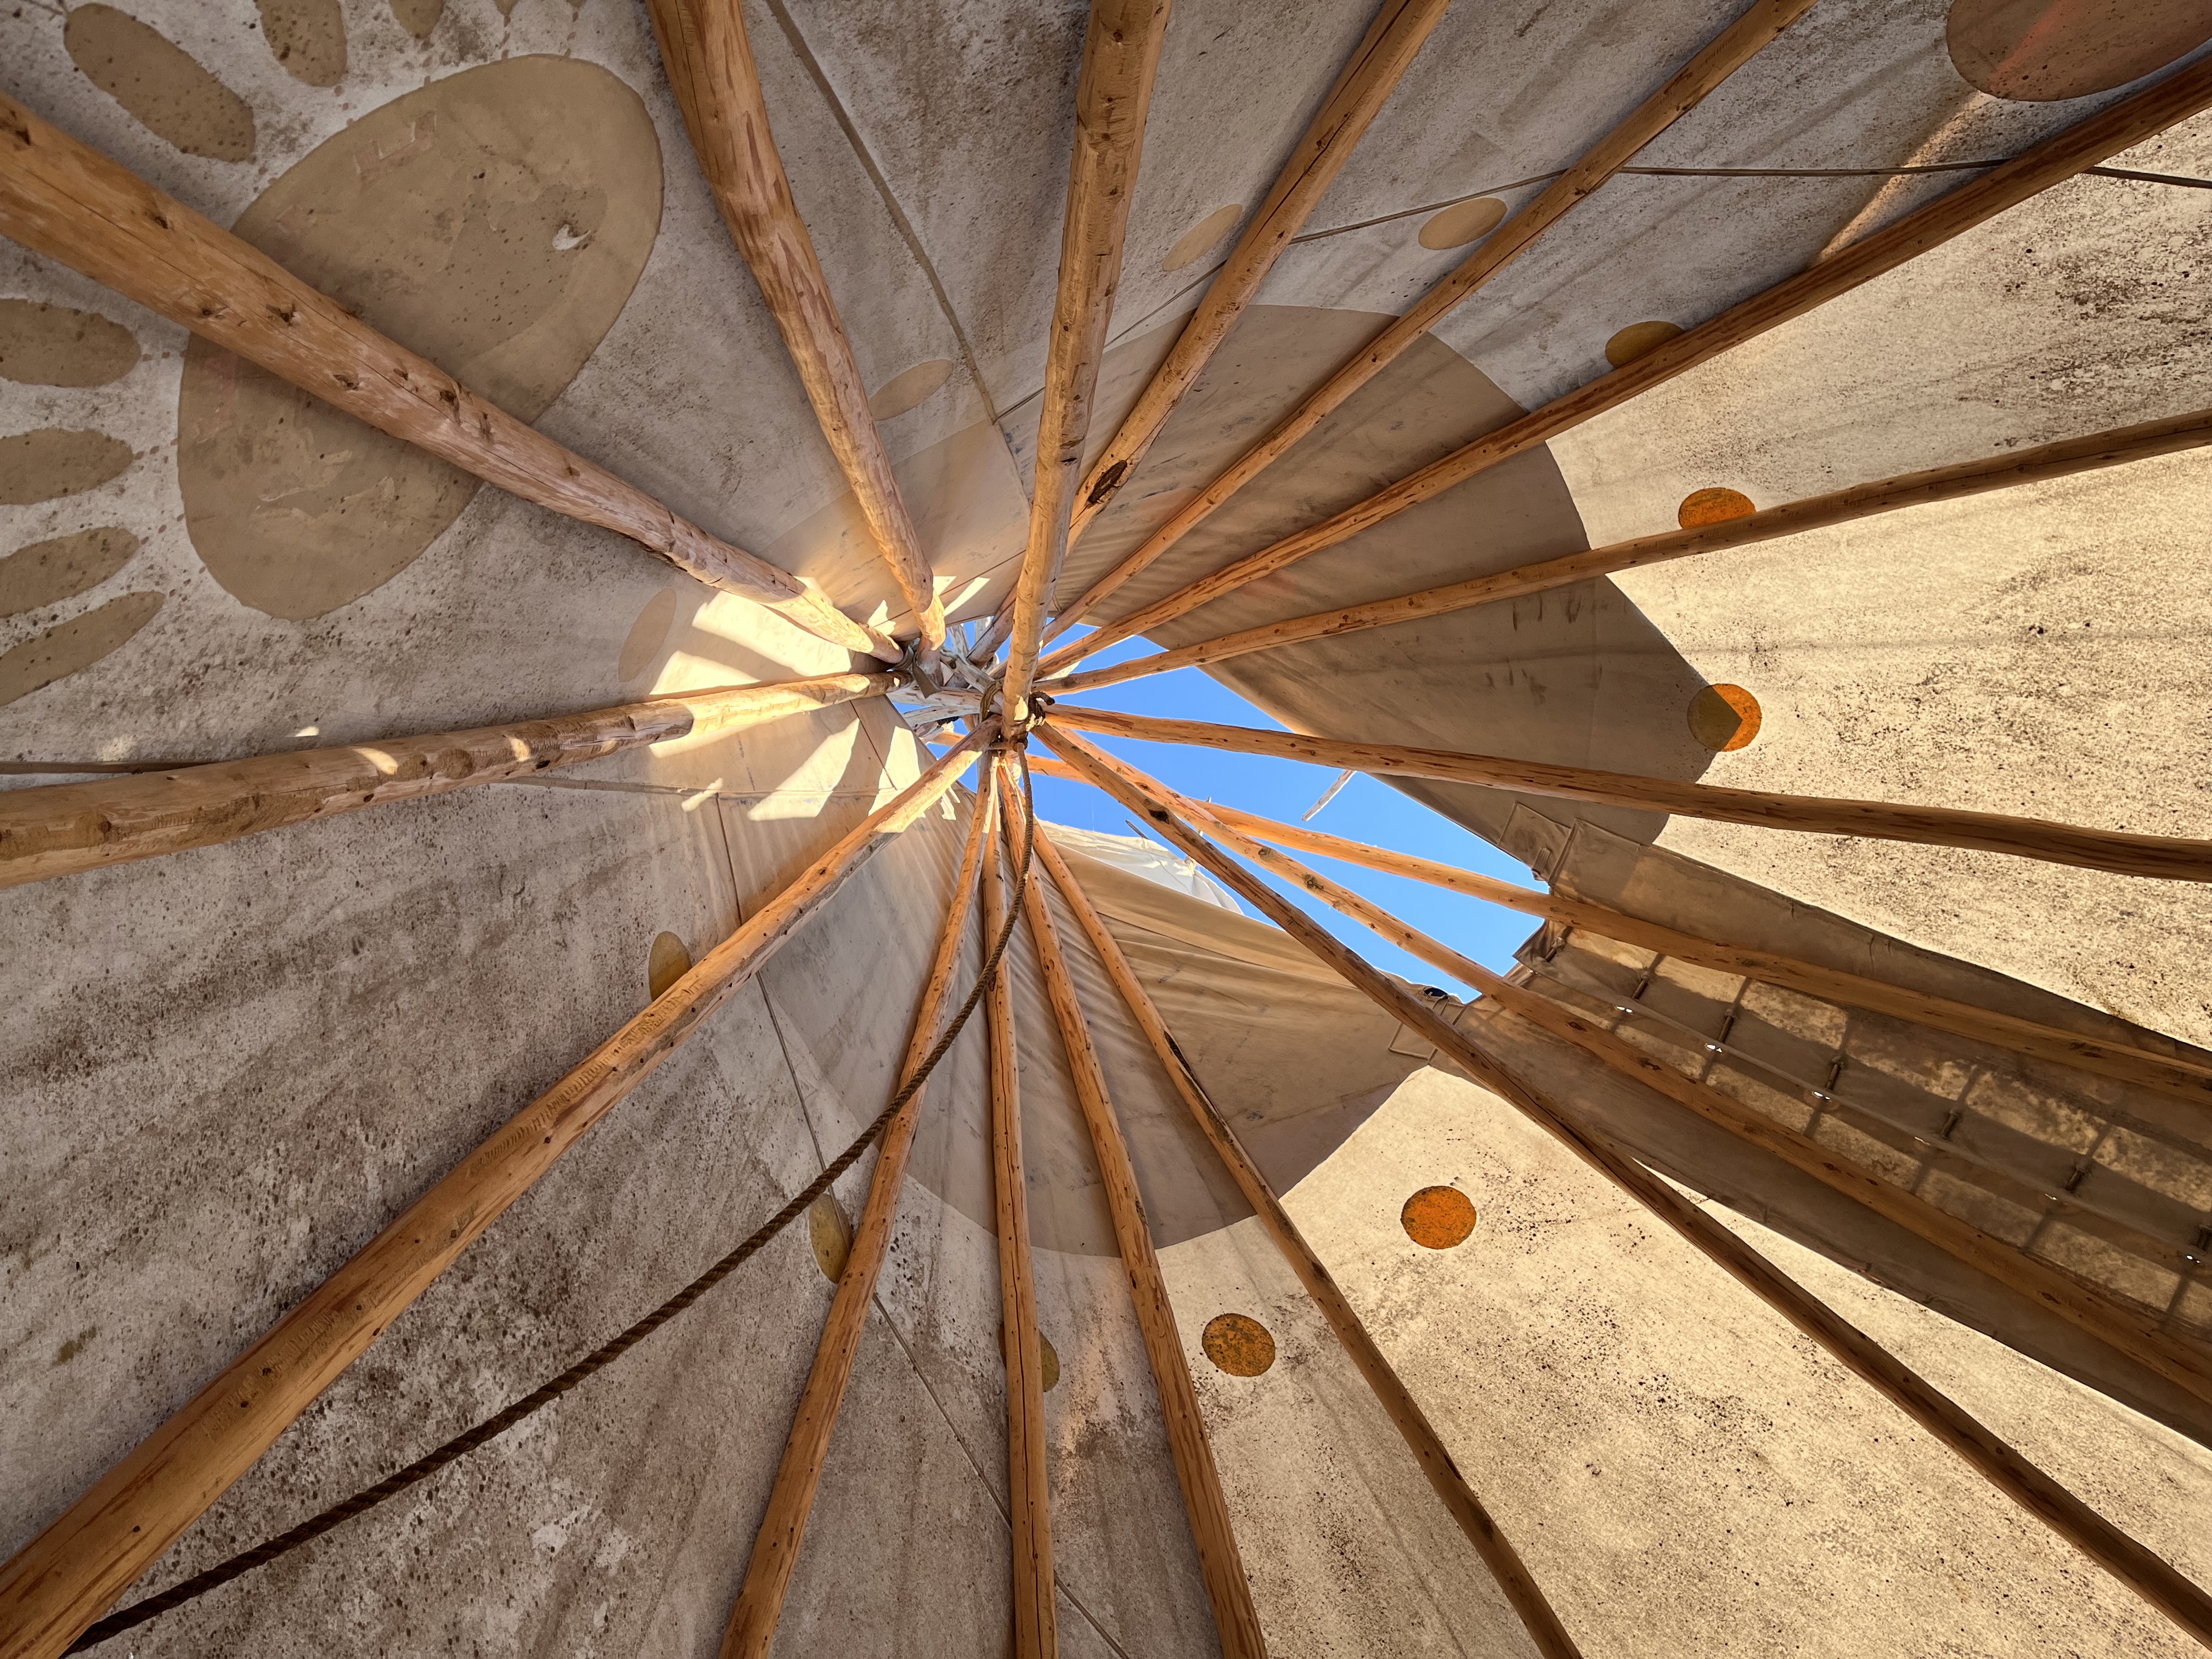 The inside of a tipi where the poles join at the top.